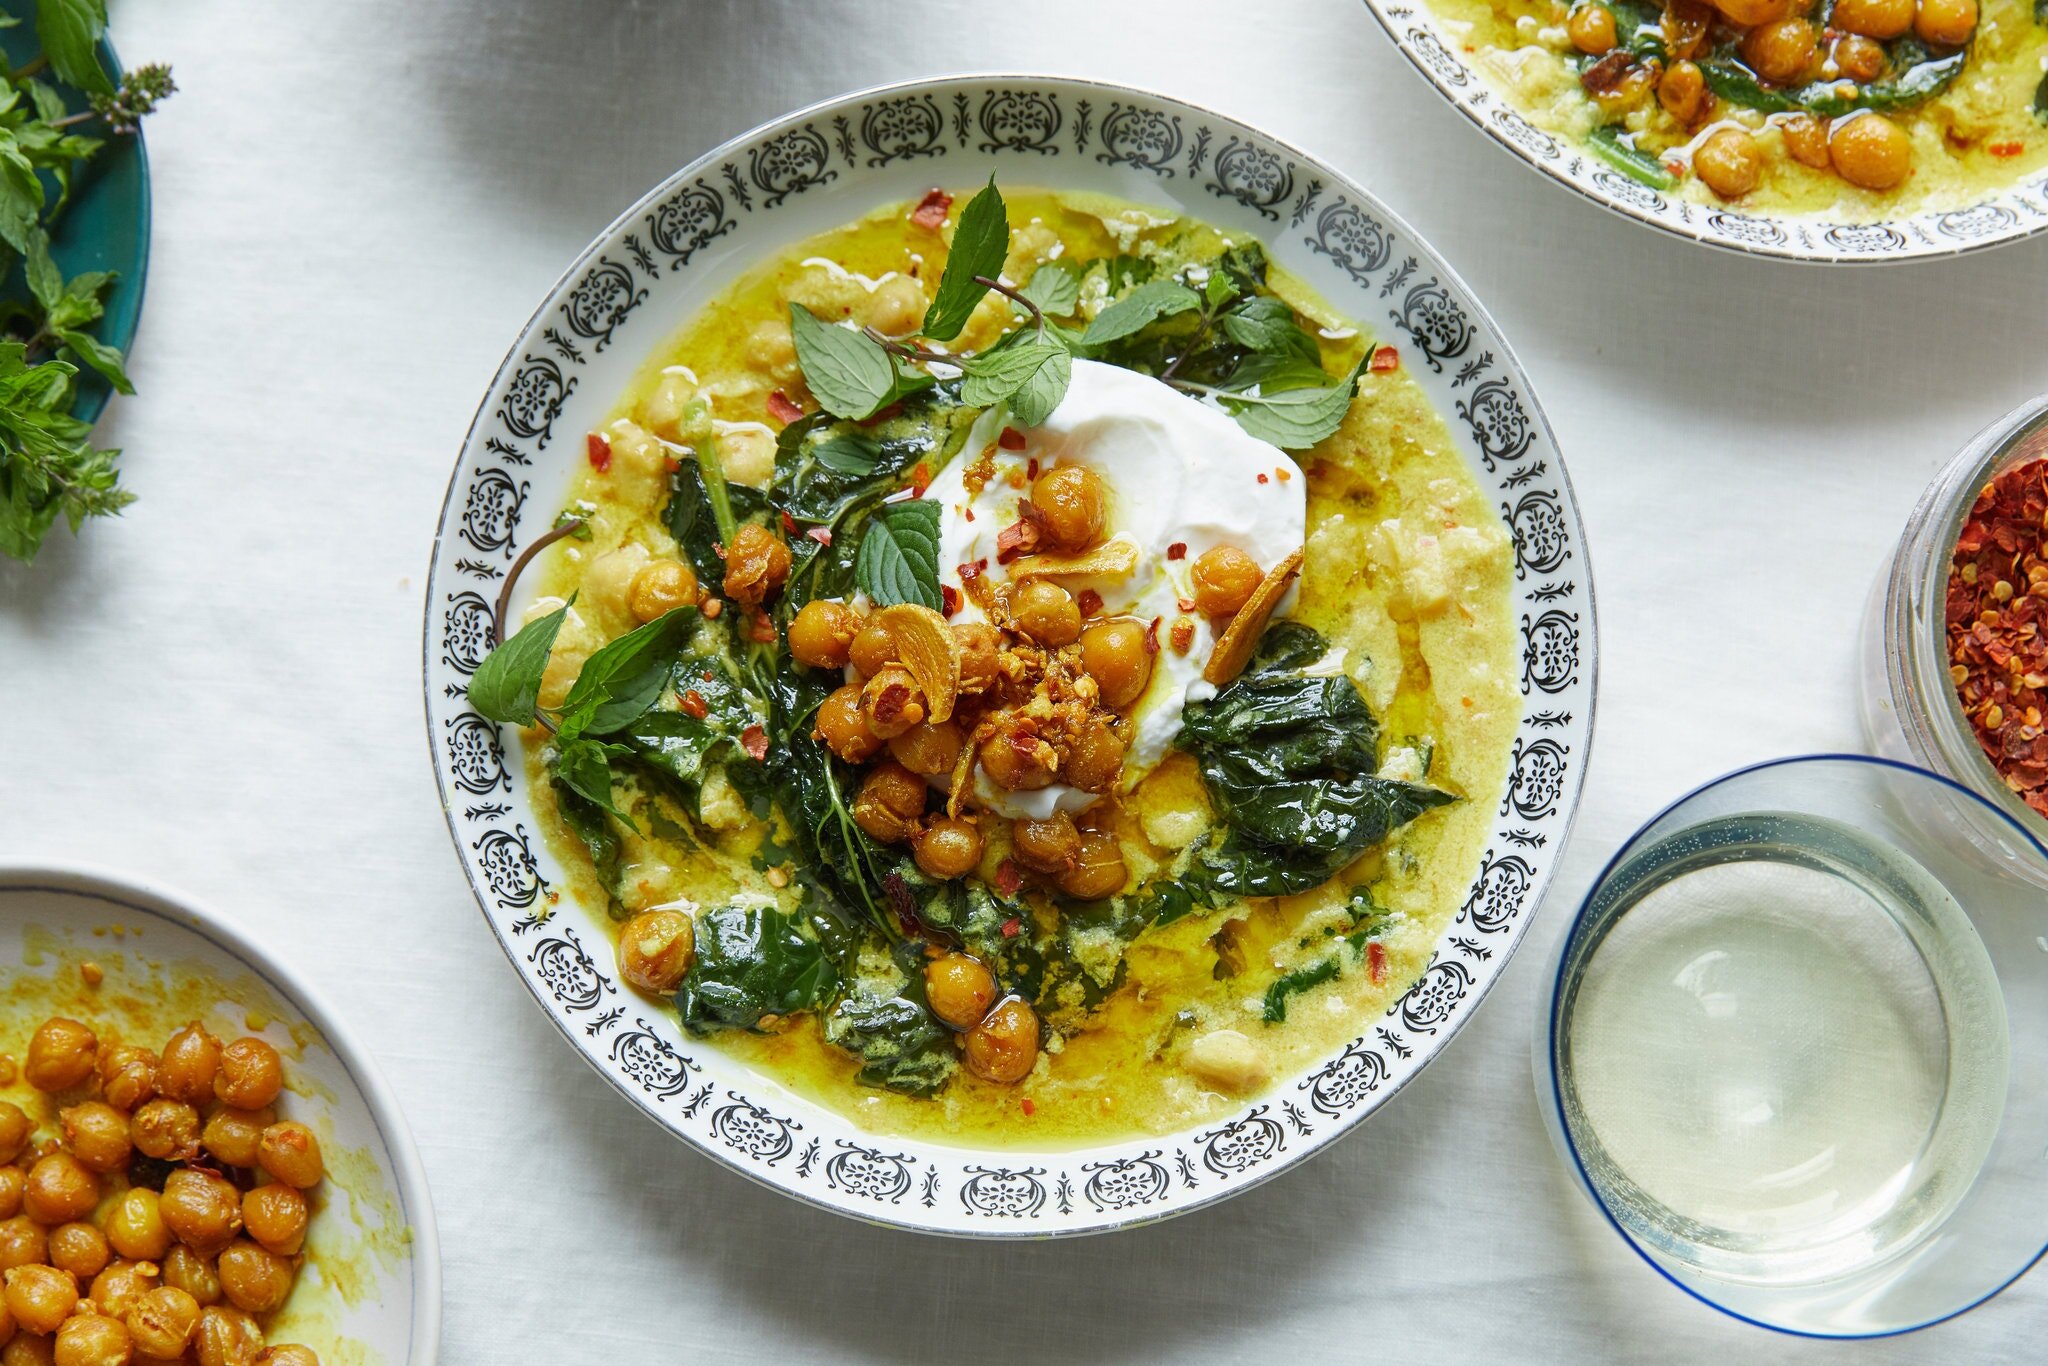 Spiced Chickpea Stew With Coconut And Turmeric — Alison Roman